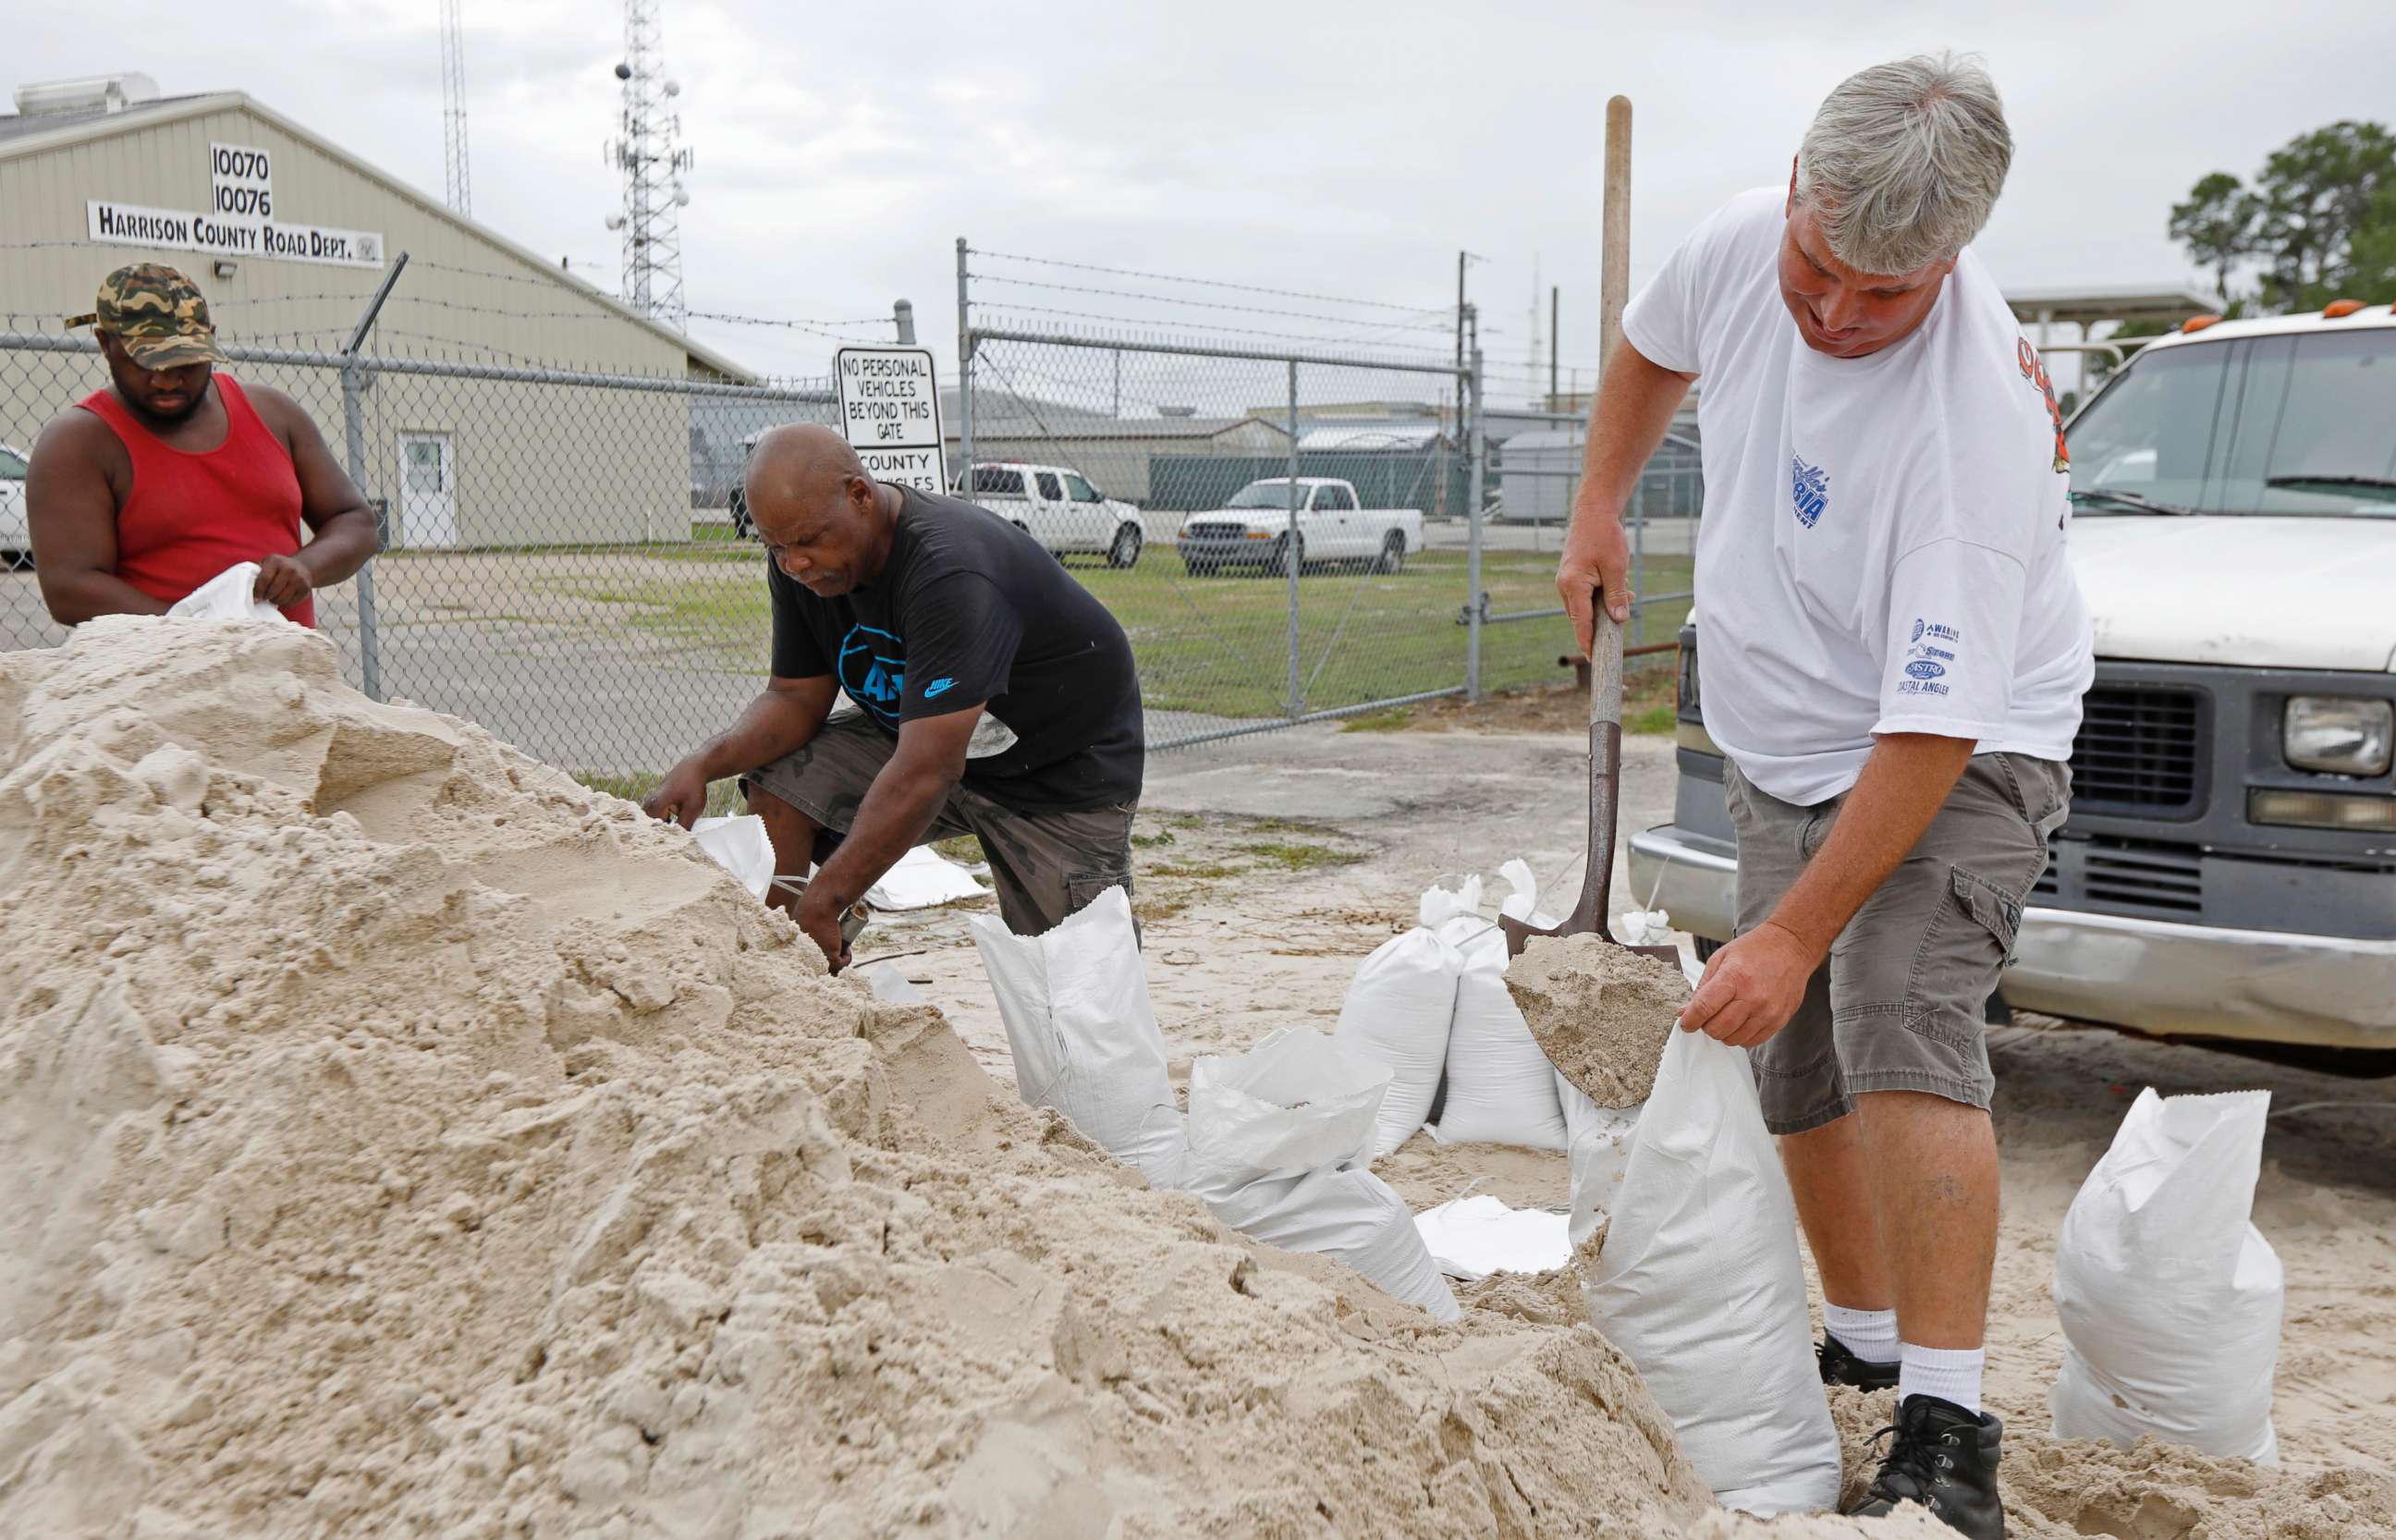 PHOTO: Gulfport, Miss., residents shovel sand into bags at a Harrison County Road Department sand bagging location, while preparing for Subtropical Storm Alberto to make its way through the Gulf of Mexico, May 26, 2018.